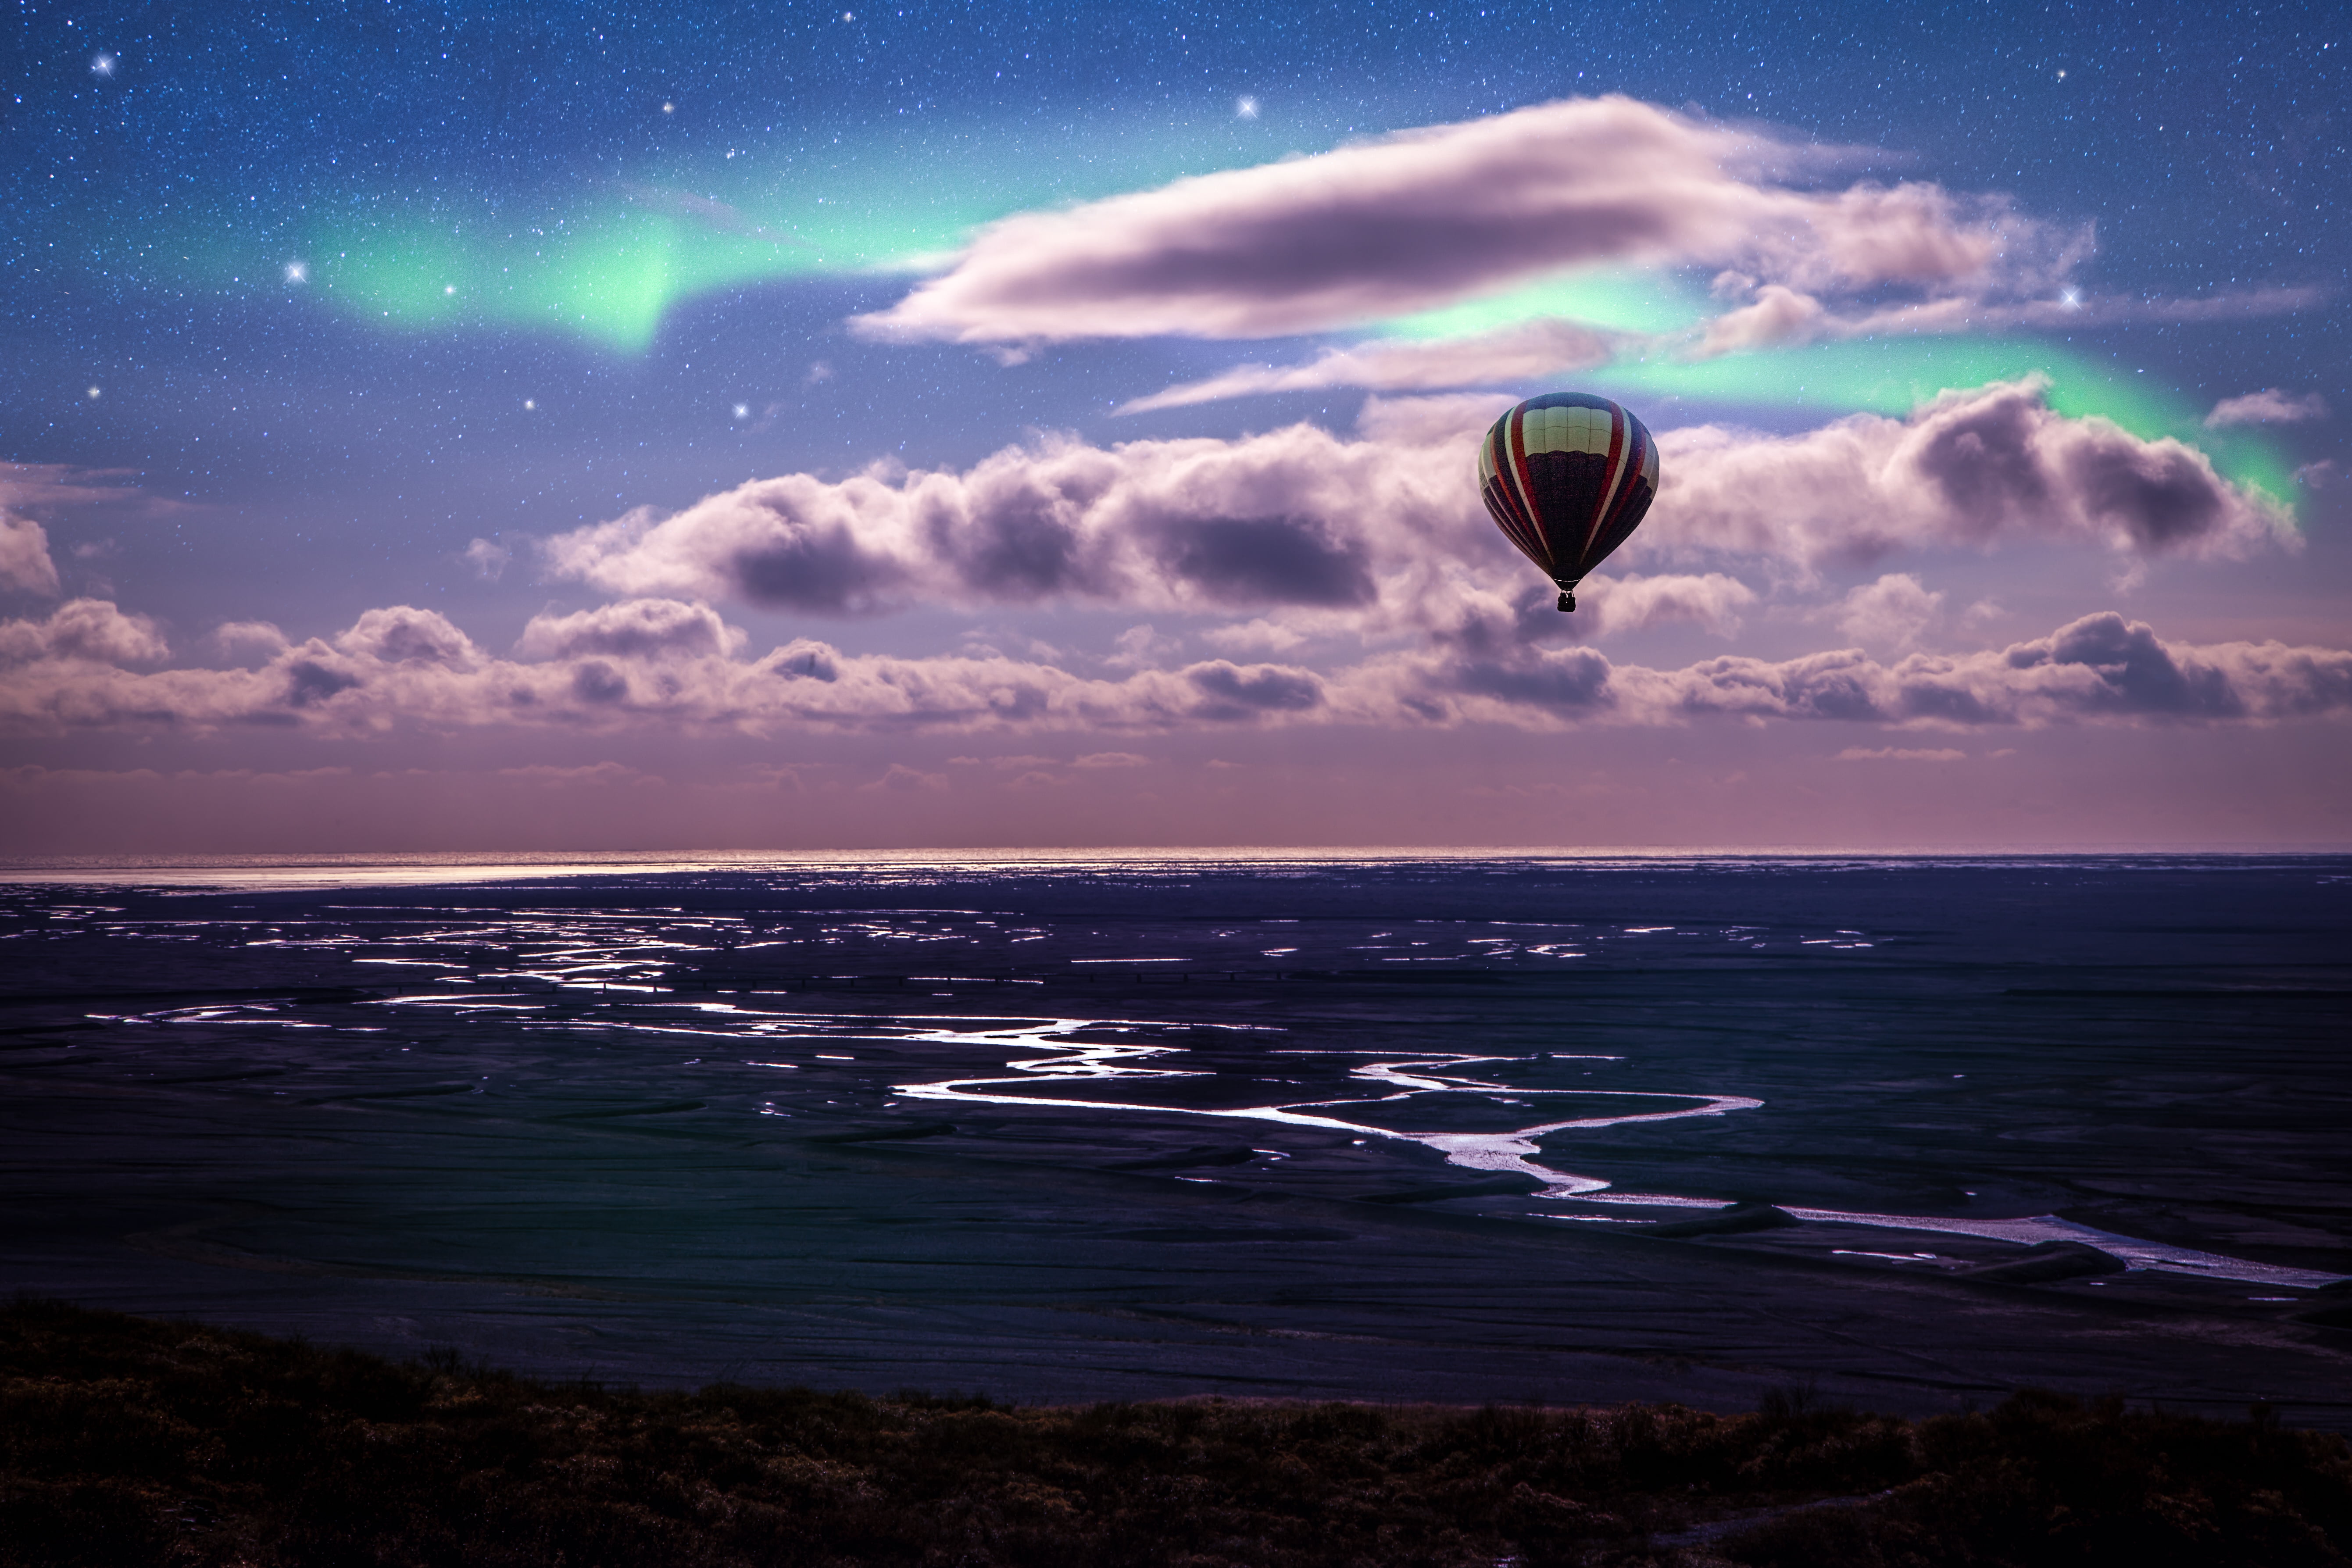 hot air balloon flying above body of water during nighttime